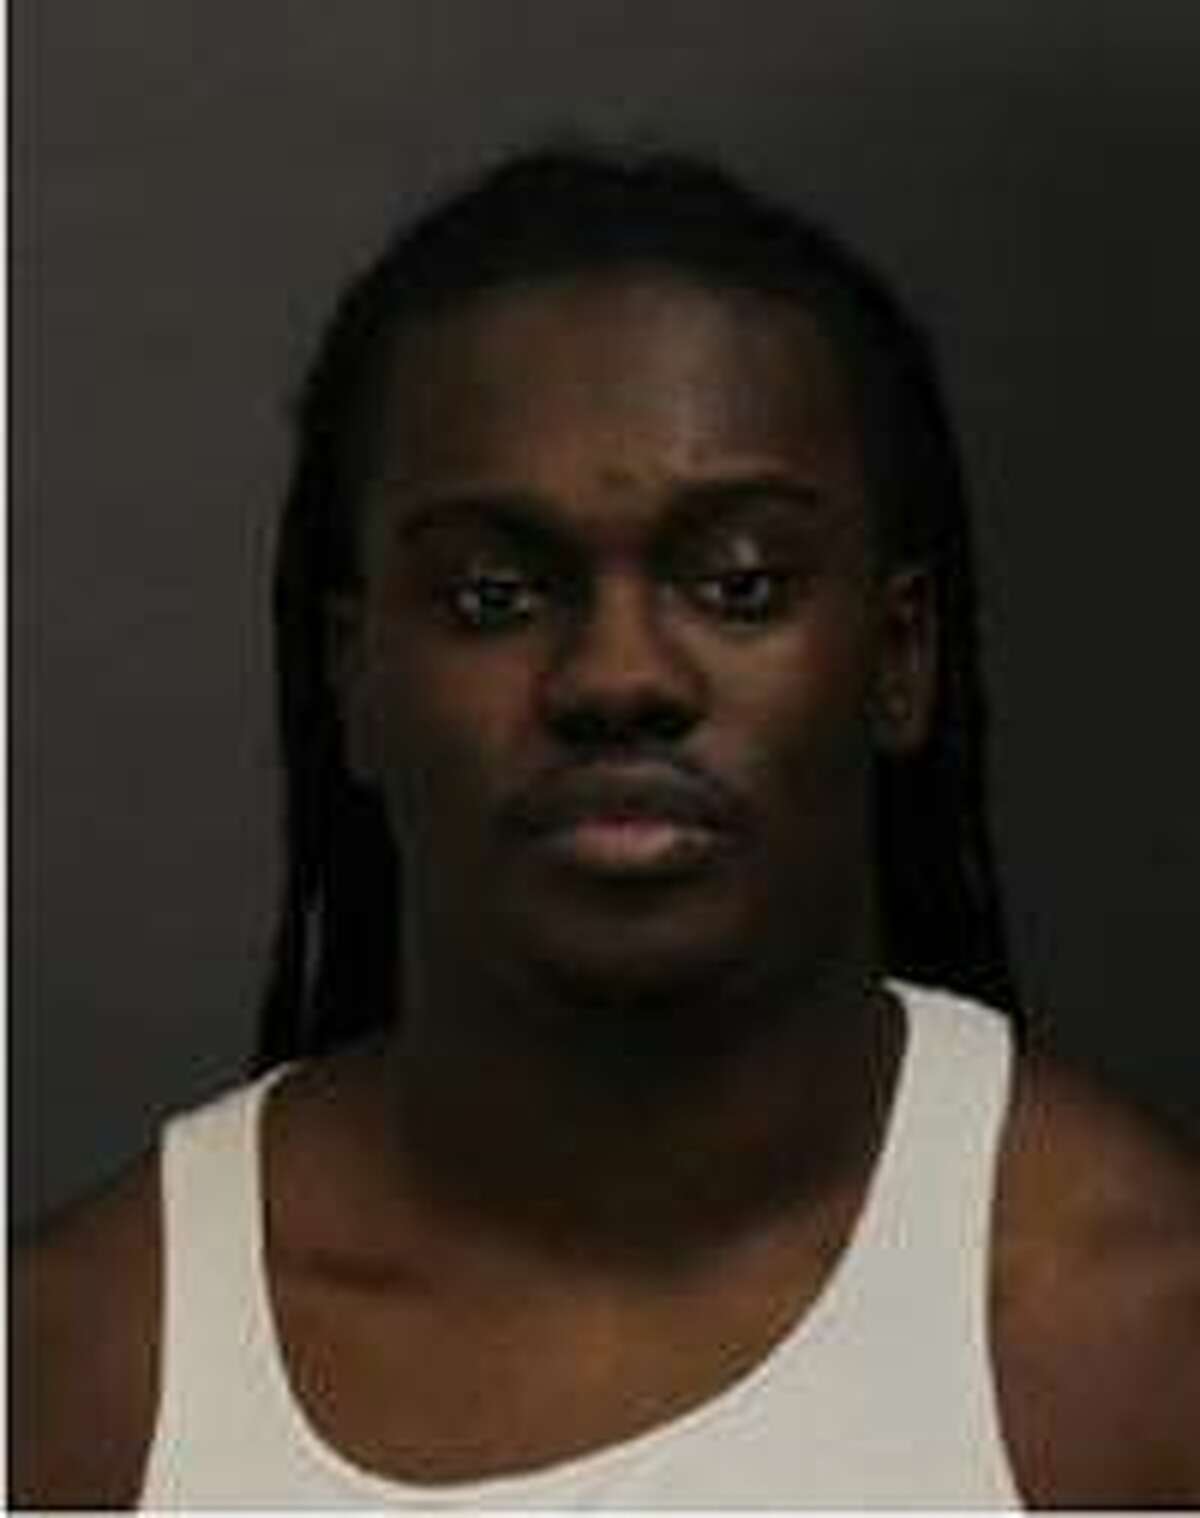 Adrian Middleton, 26, has been charged with child abandonment.